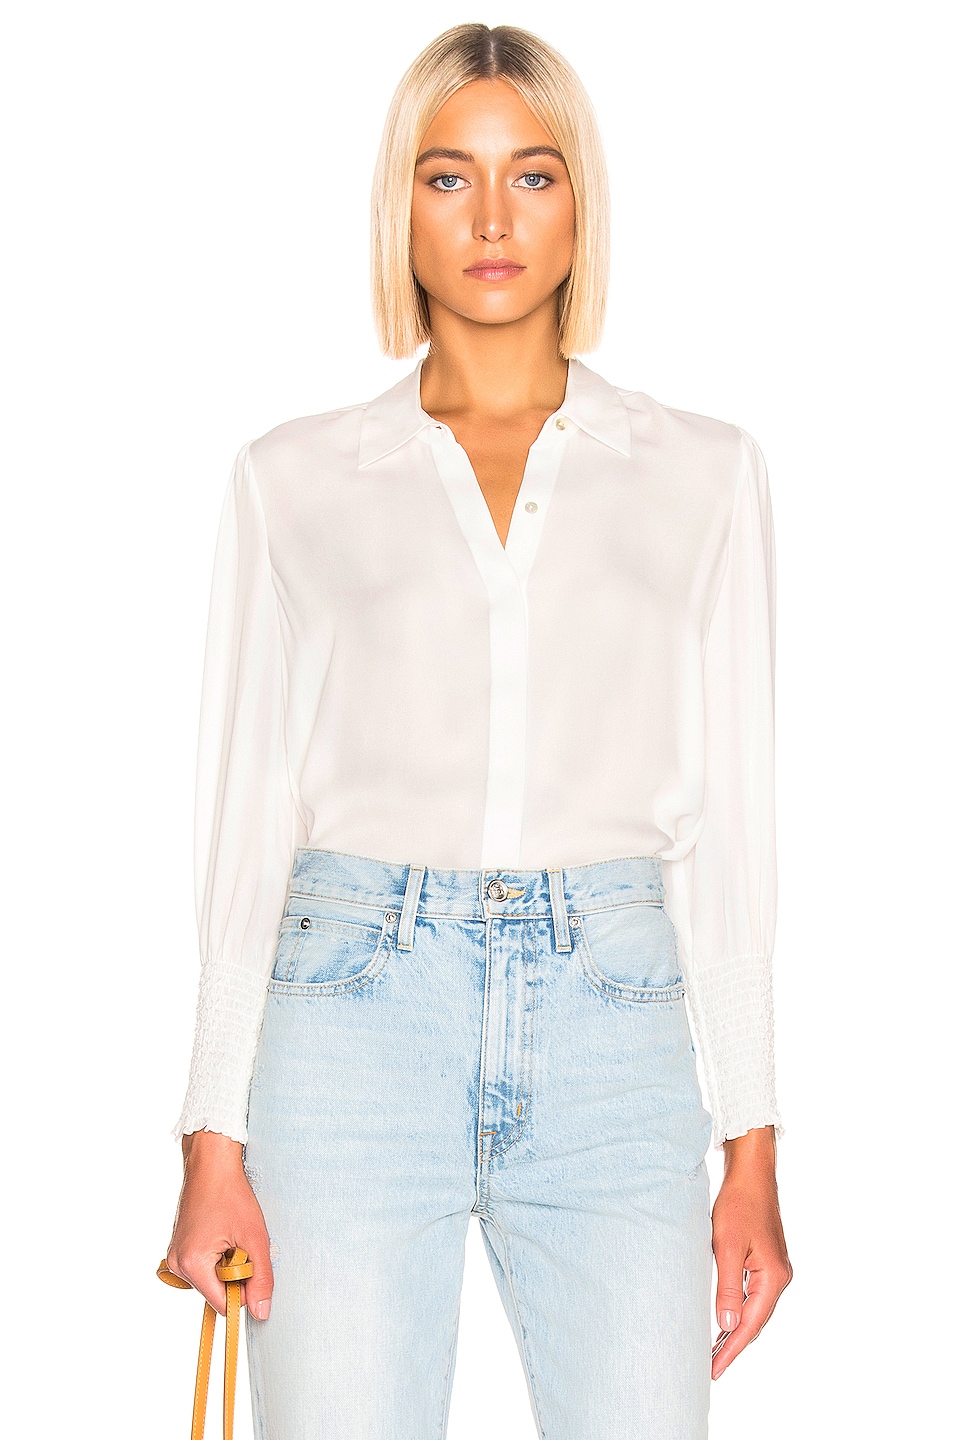 L'AGENCE Lucin Diamond Smoked Cuff Blouse in Ivory | FWRD